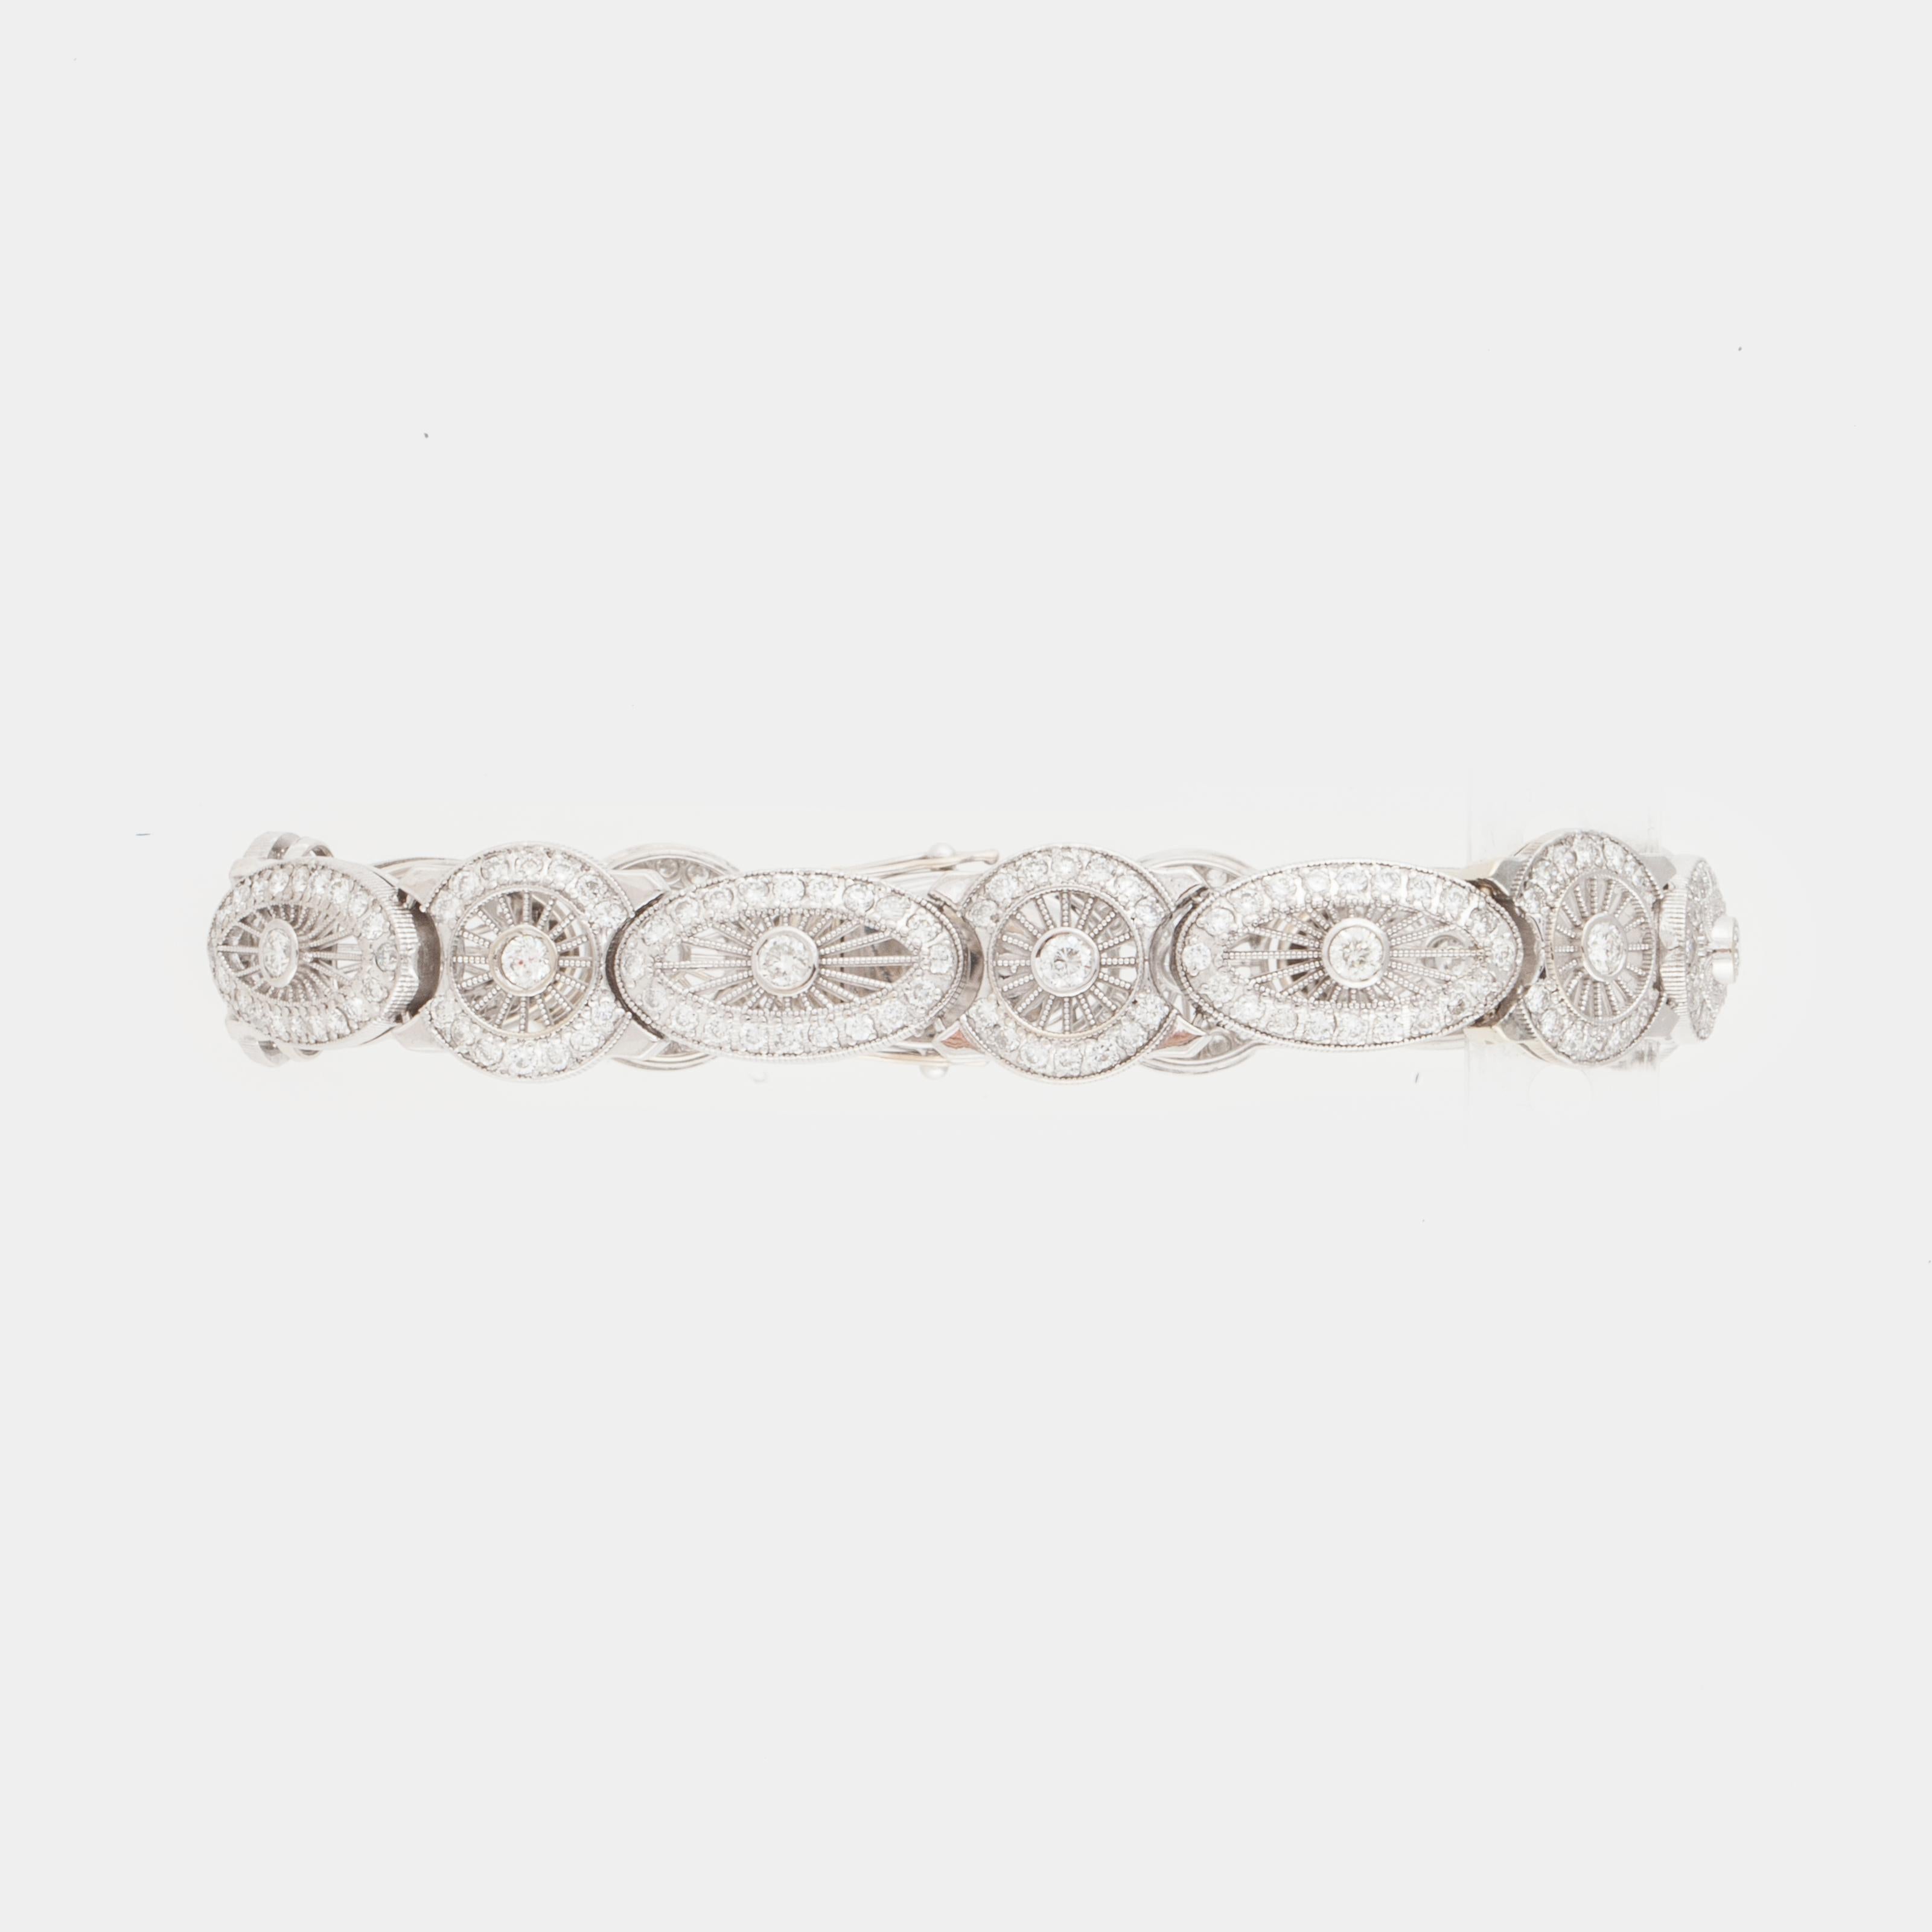 1940's bracelet in 14K white openwork gold and diamonds.  The bracelet is marked 